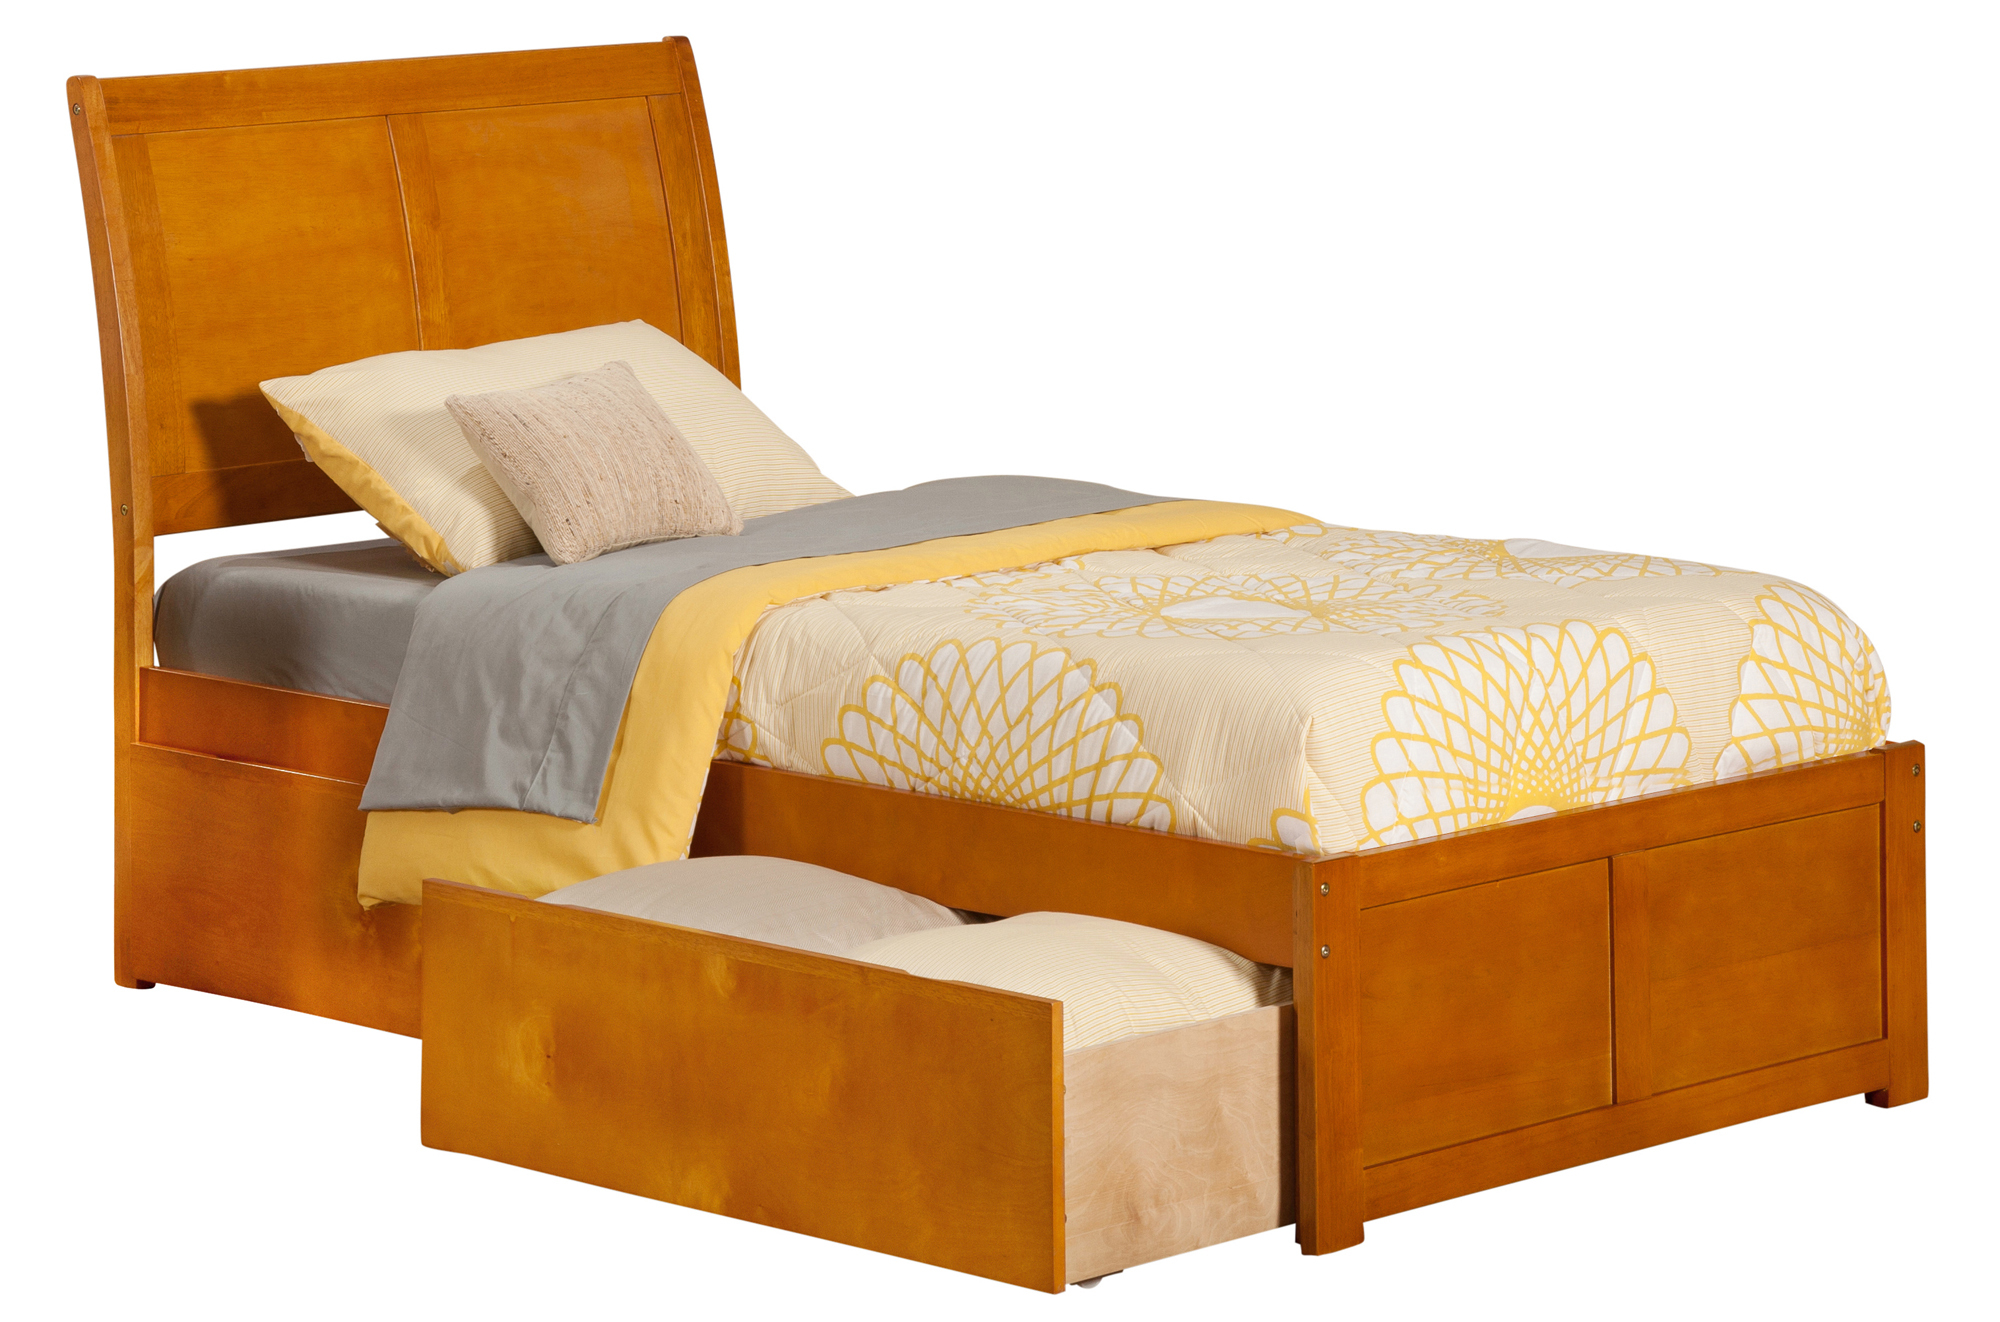 Portland Platform Bed with Flat Panel Foot Board and 2 Urban Bed Drawers in, Multiple Colors and Sizes - image 1 of 4